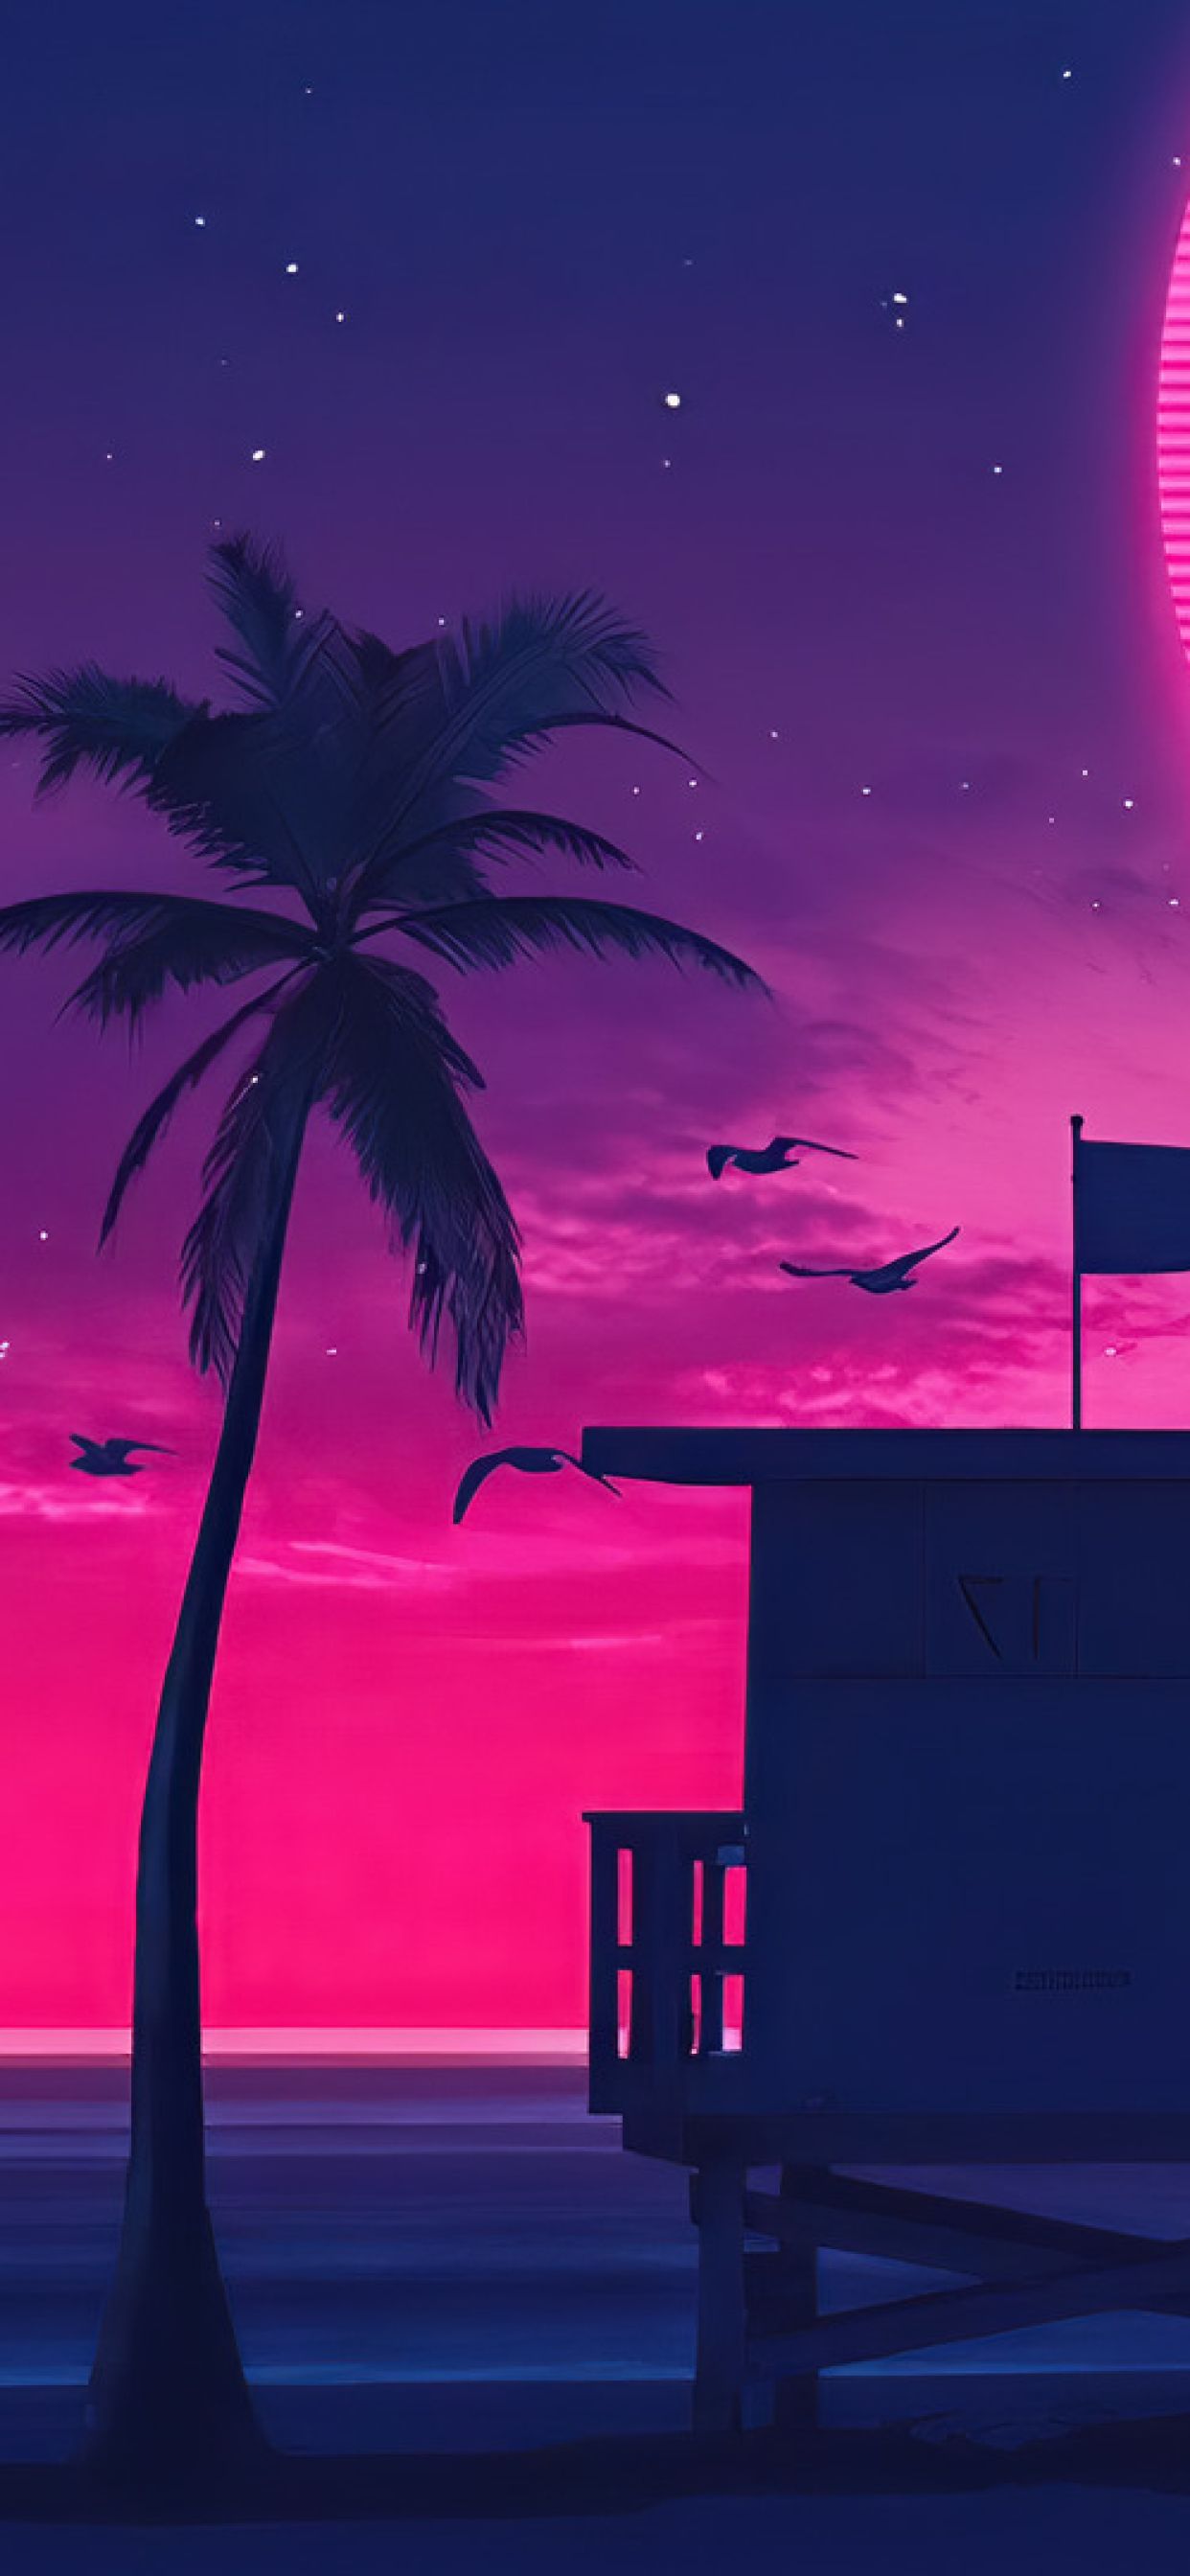 Beach Retro Wave iPhone XS MAX Wallpaper, HD Artist 4K Wallpaper, Image, Photo and Background